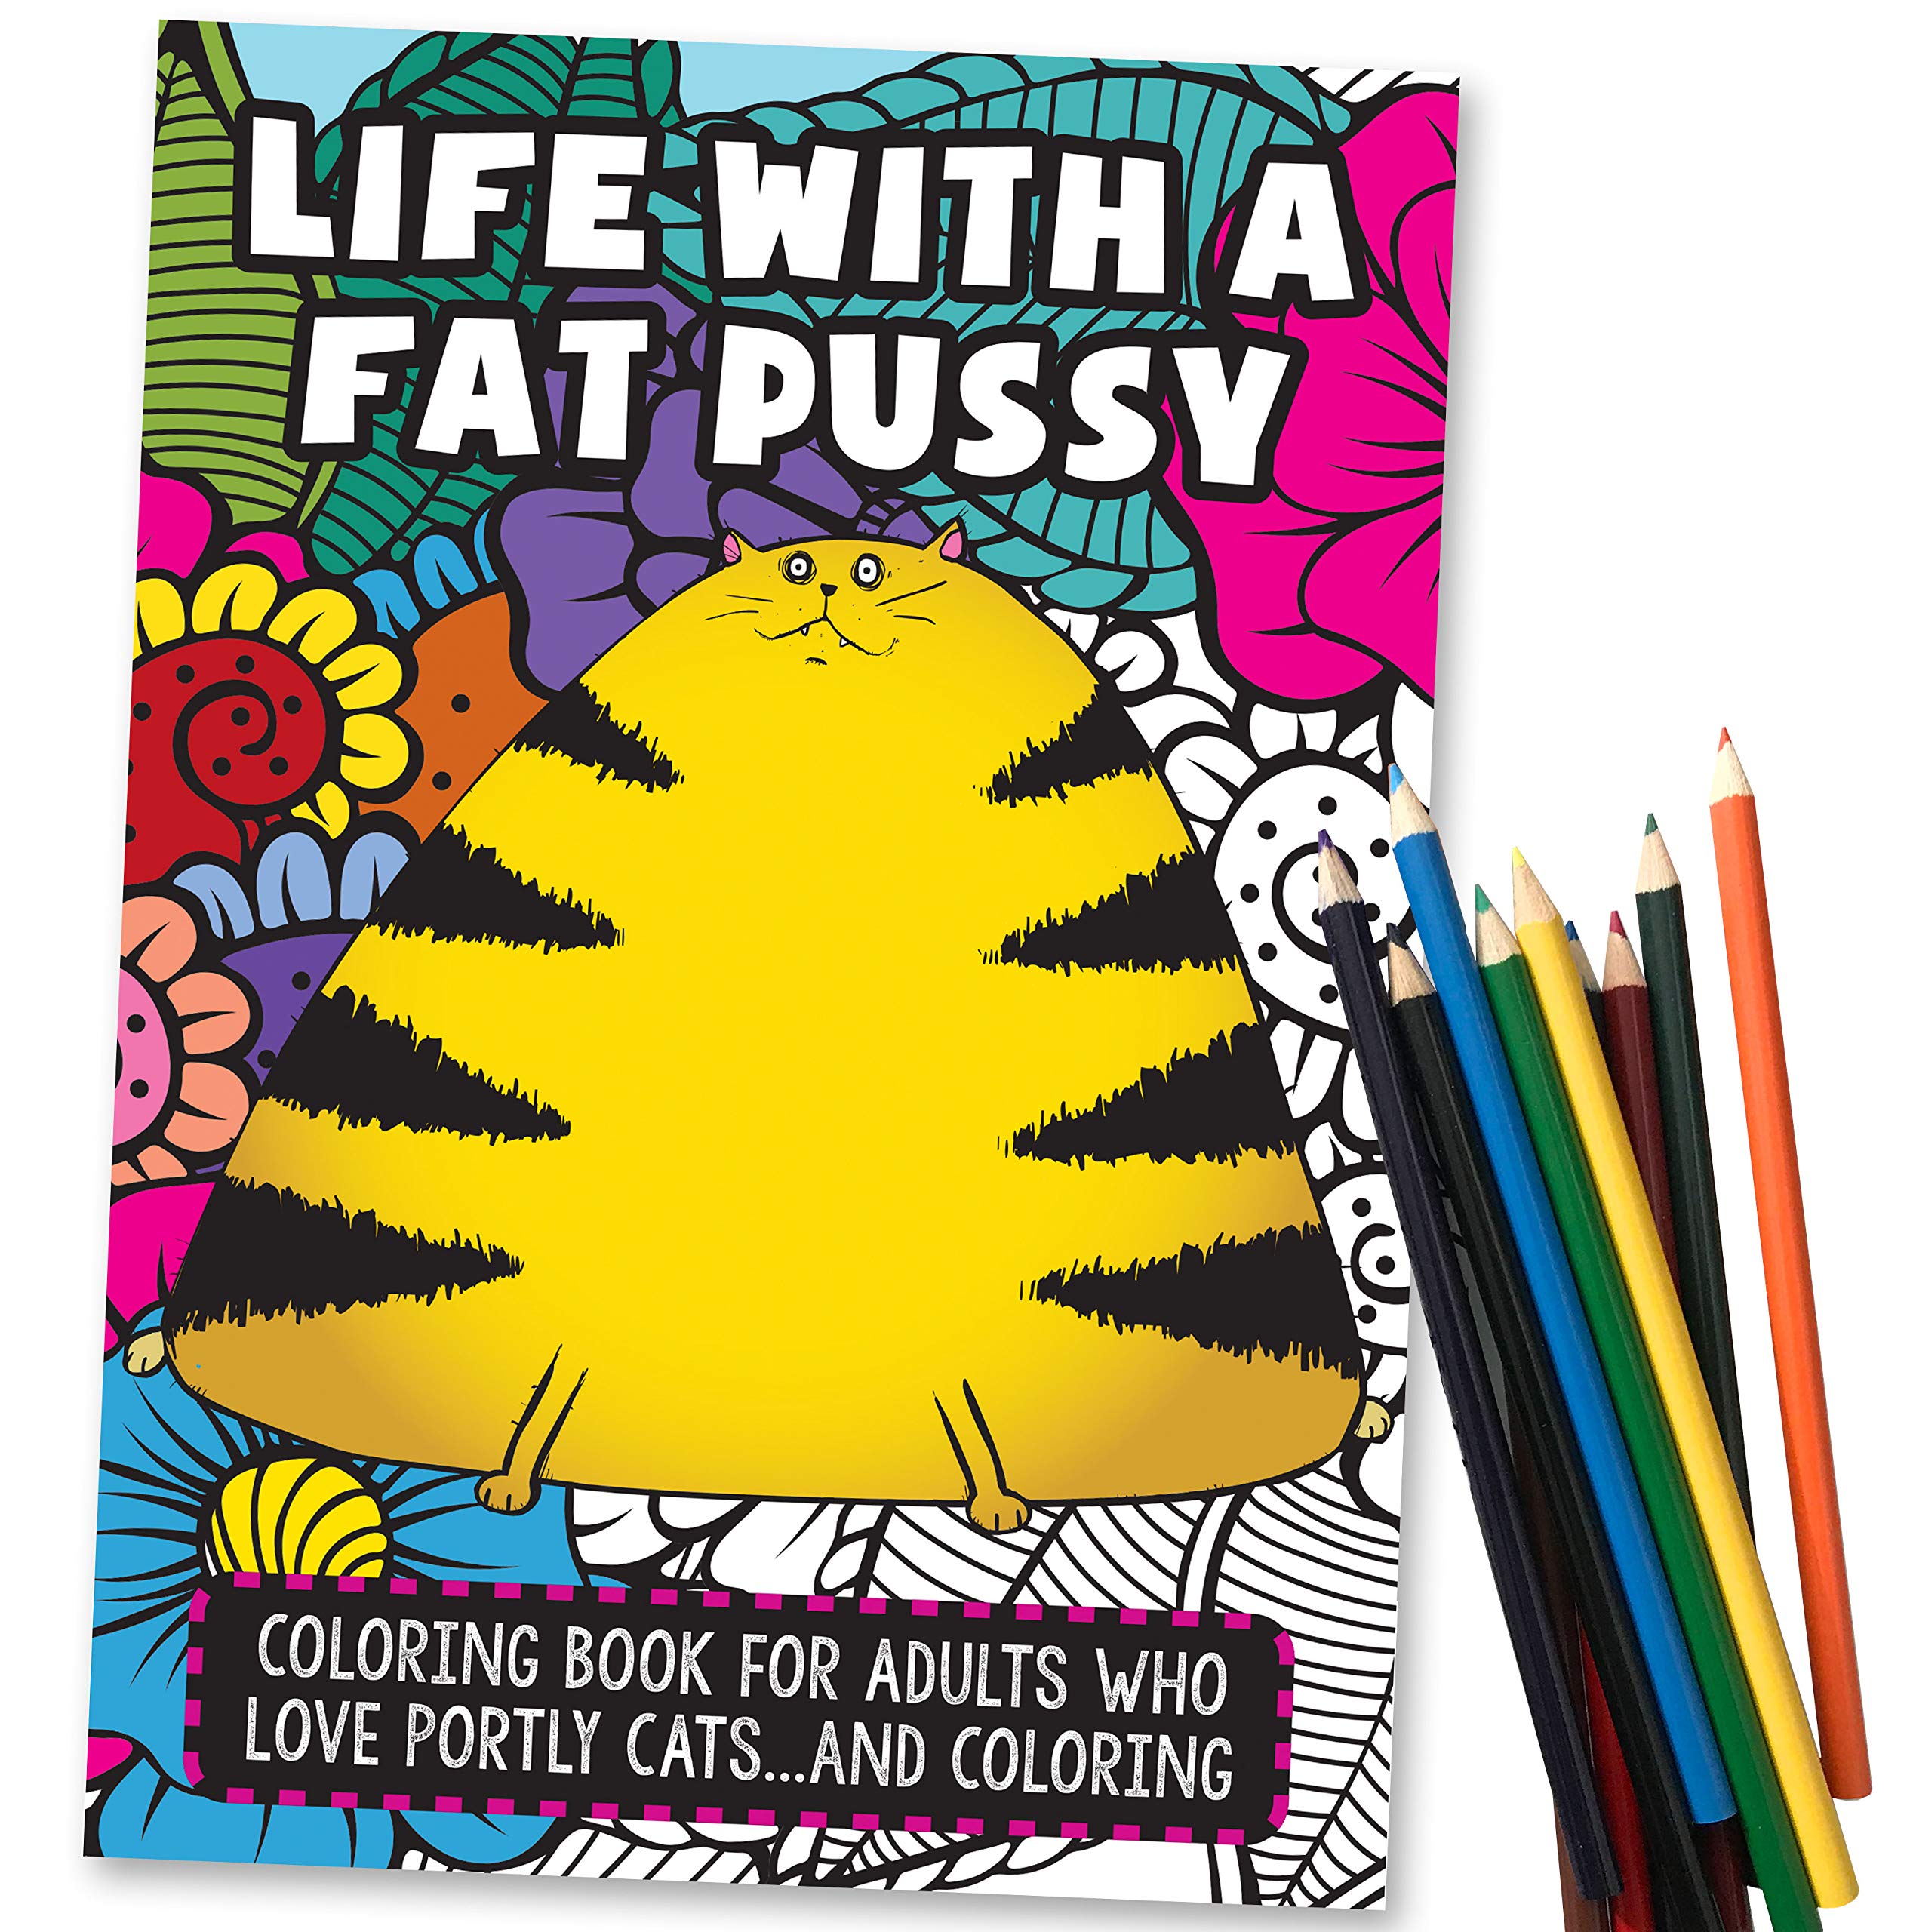 donna hoggard recommends i love fat pussy pic